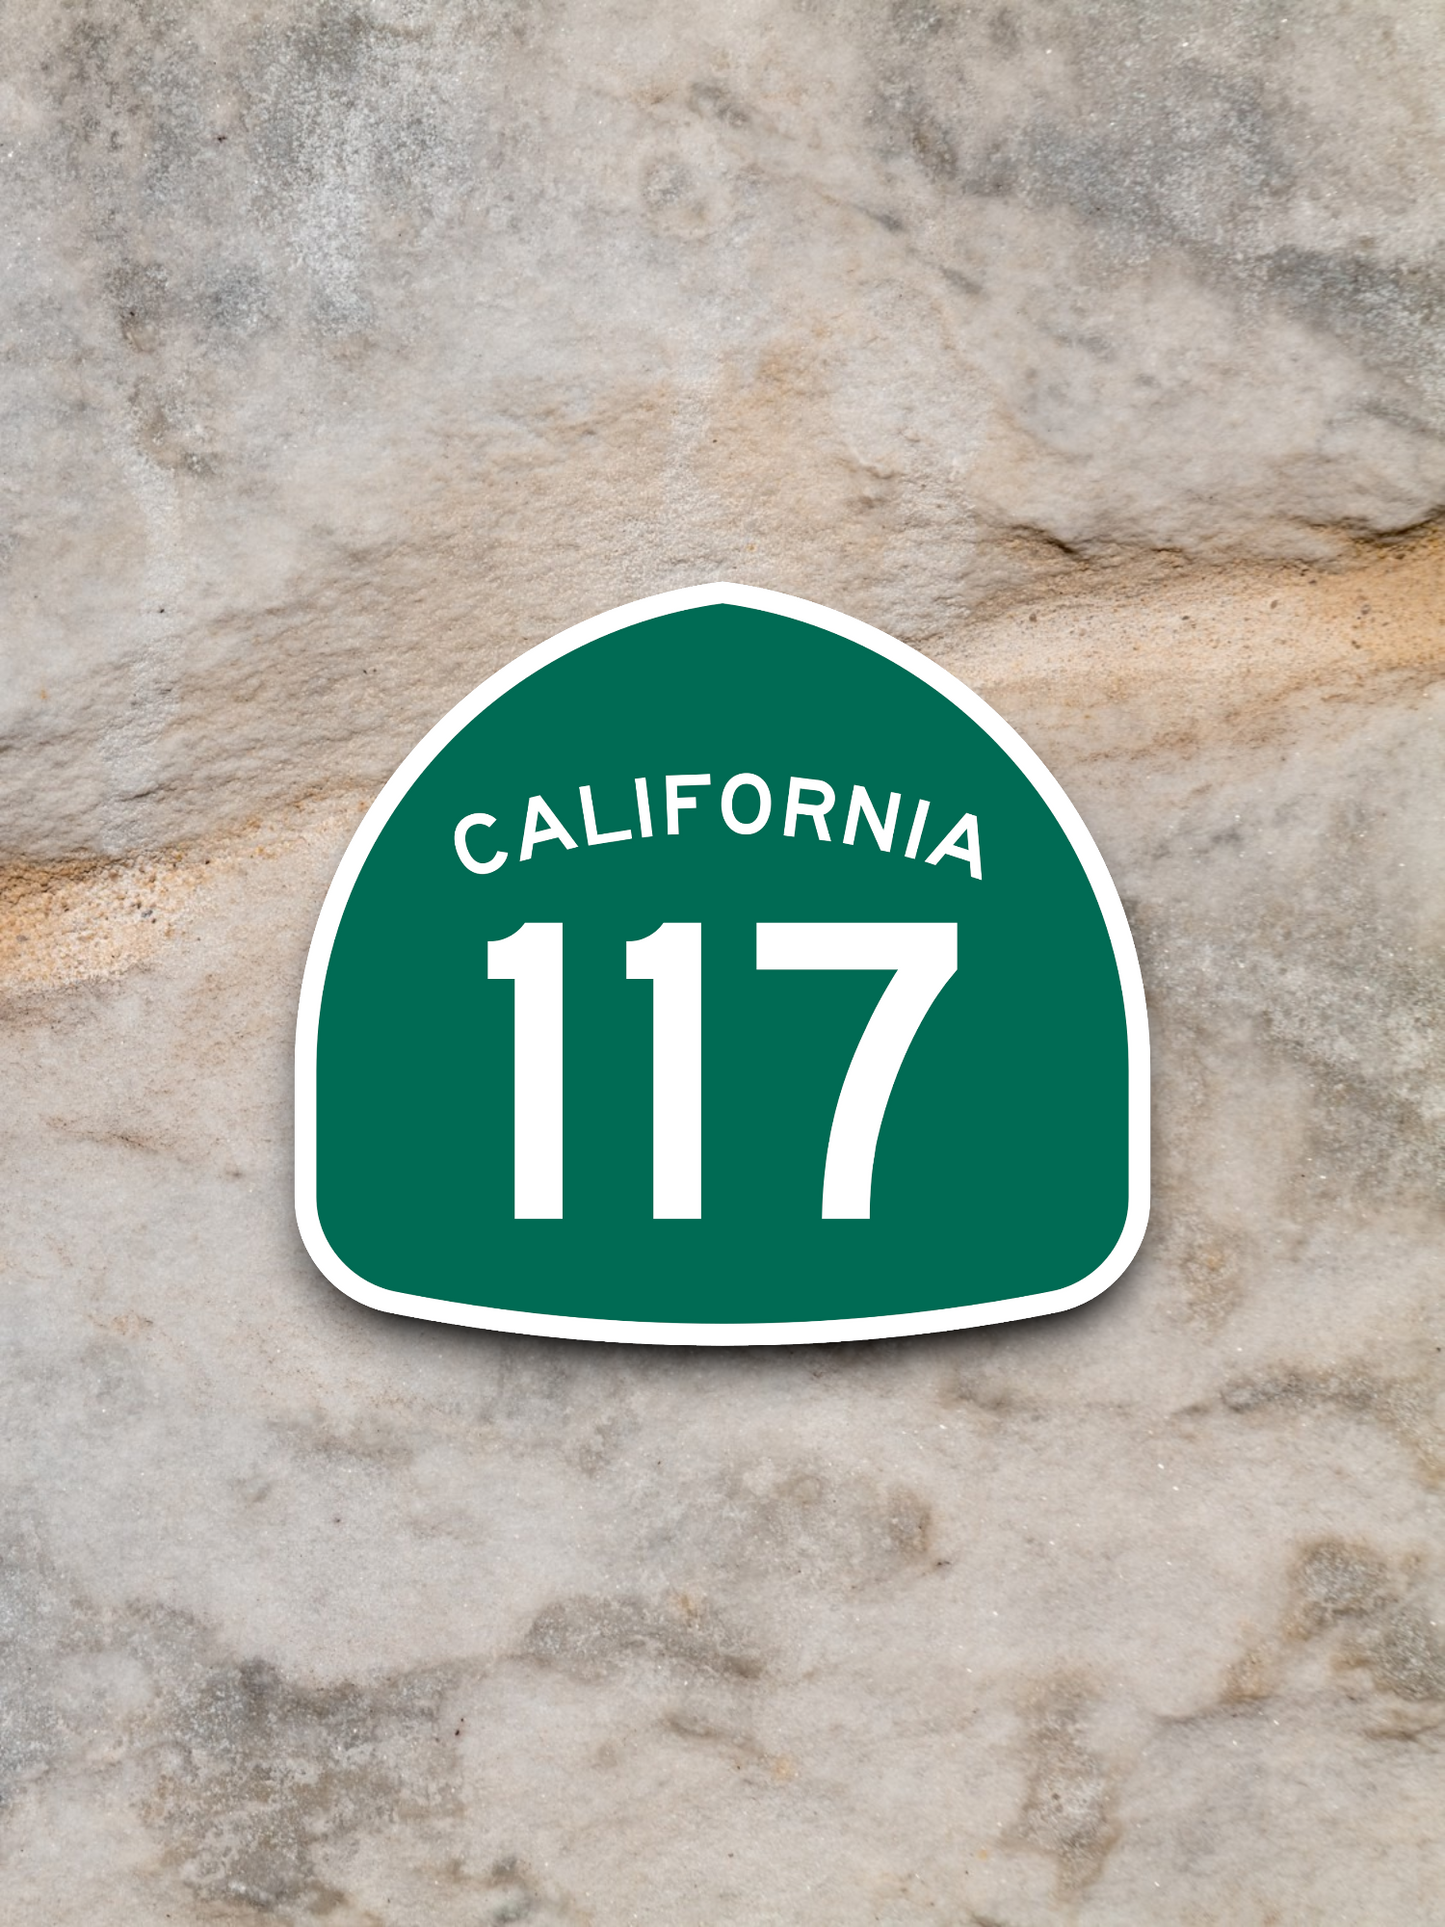 California State Route 117 Road Sign Sticker